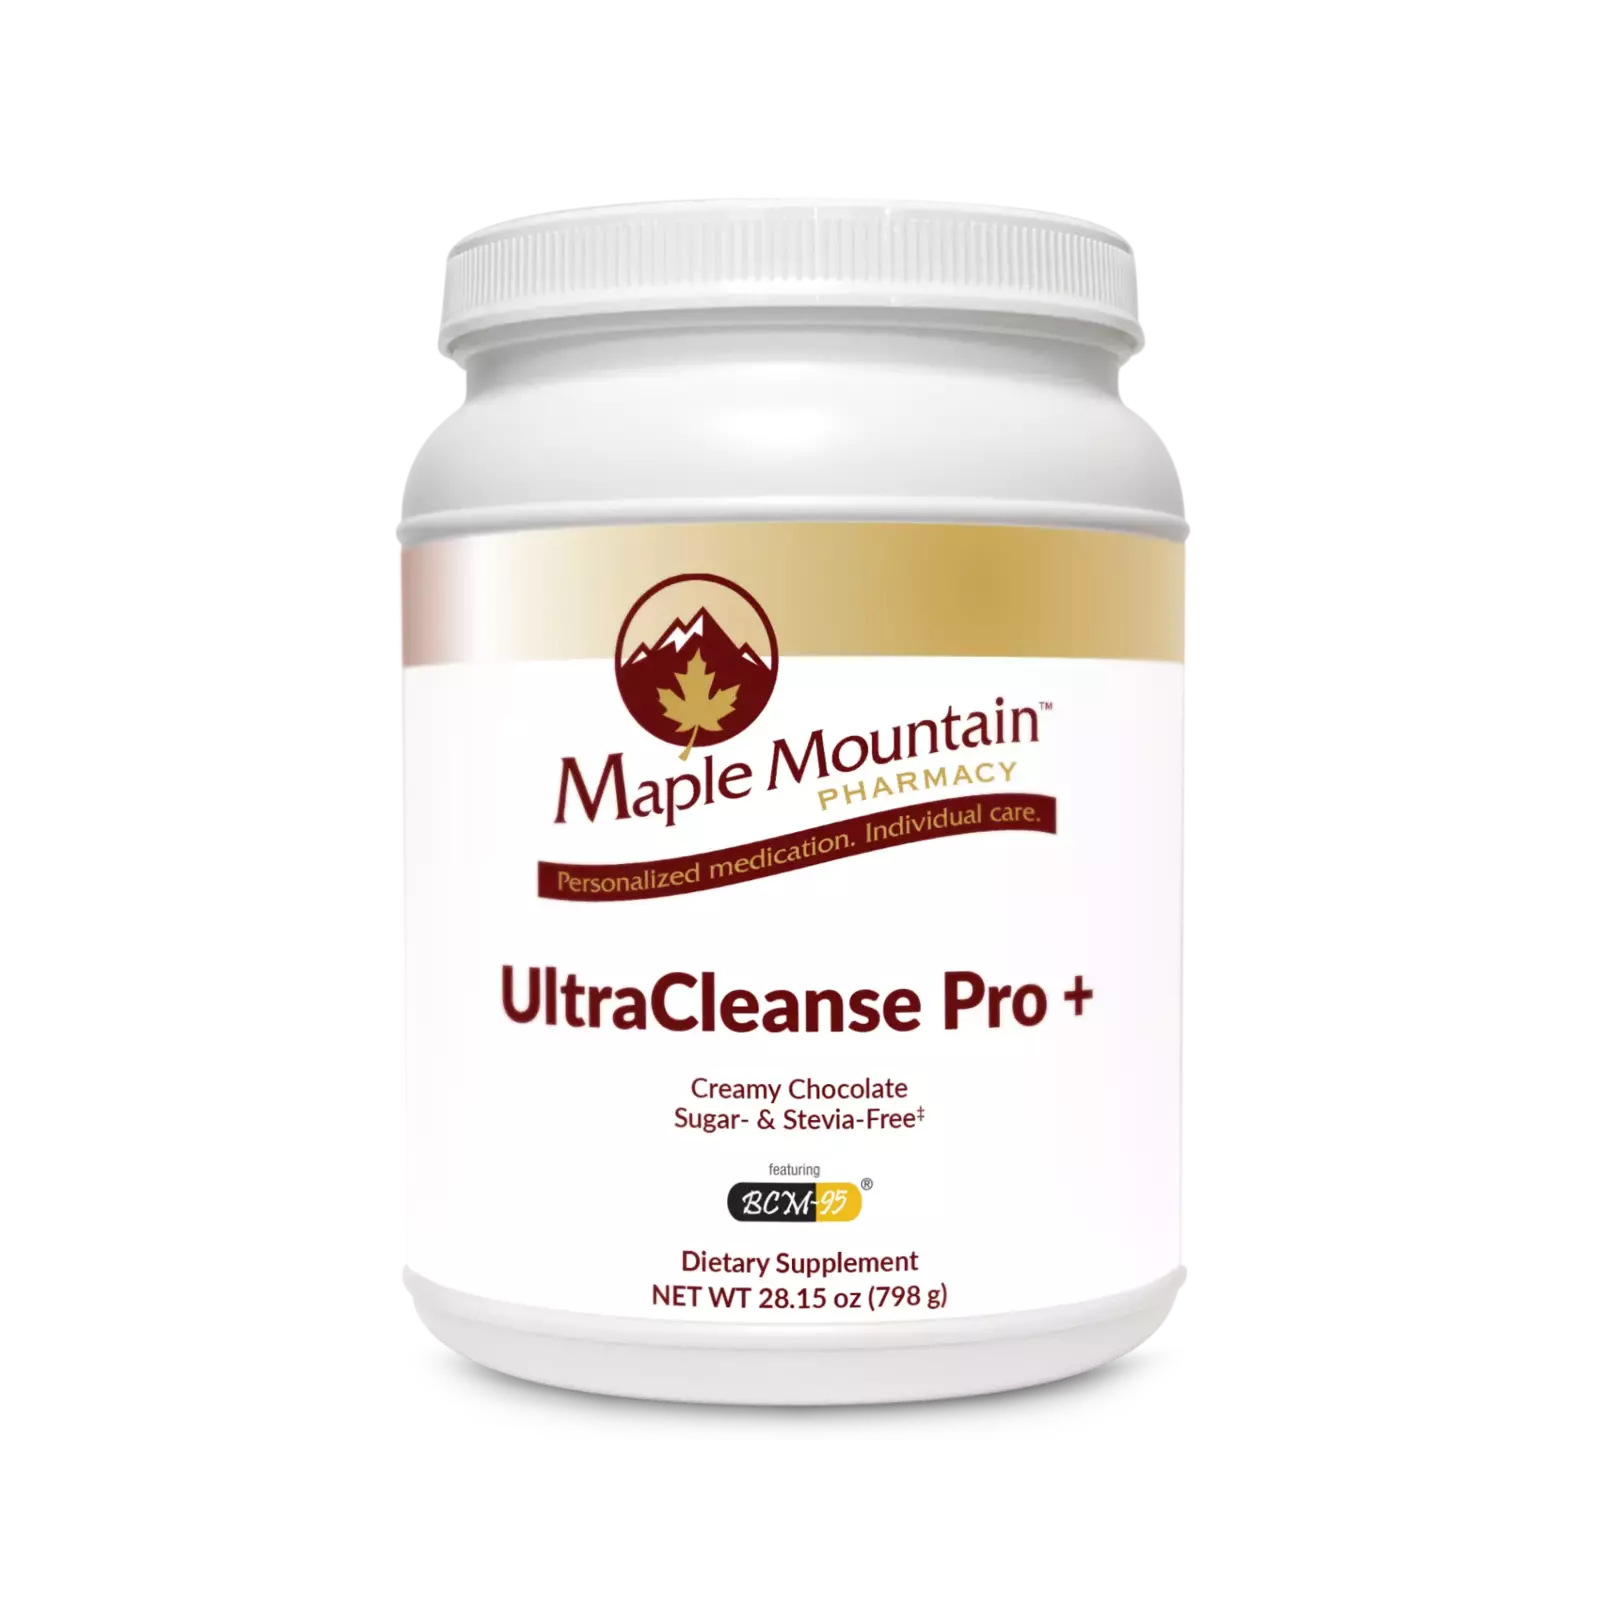 UltraCleanse Pro +